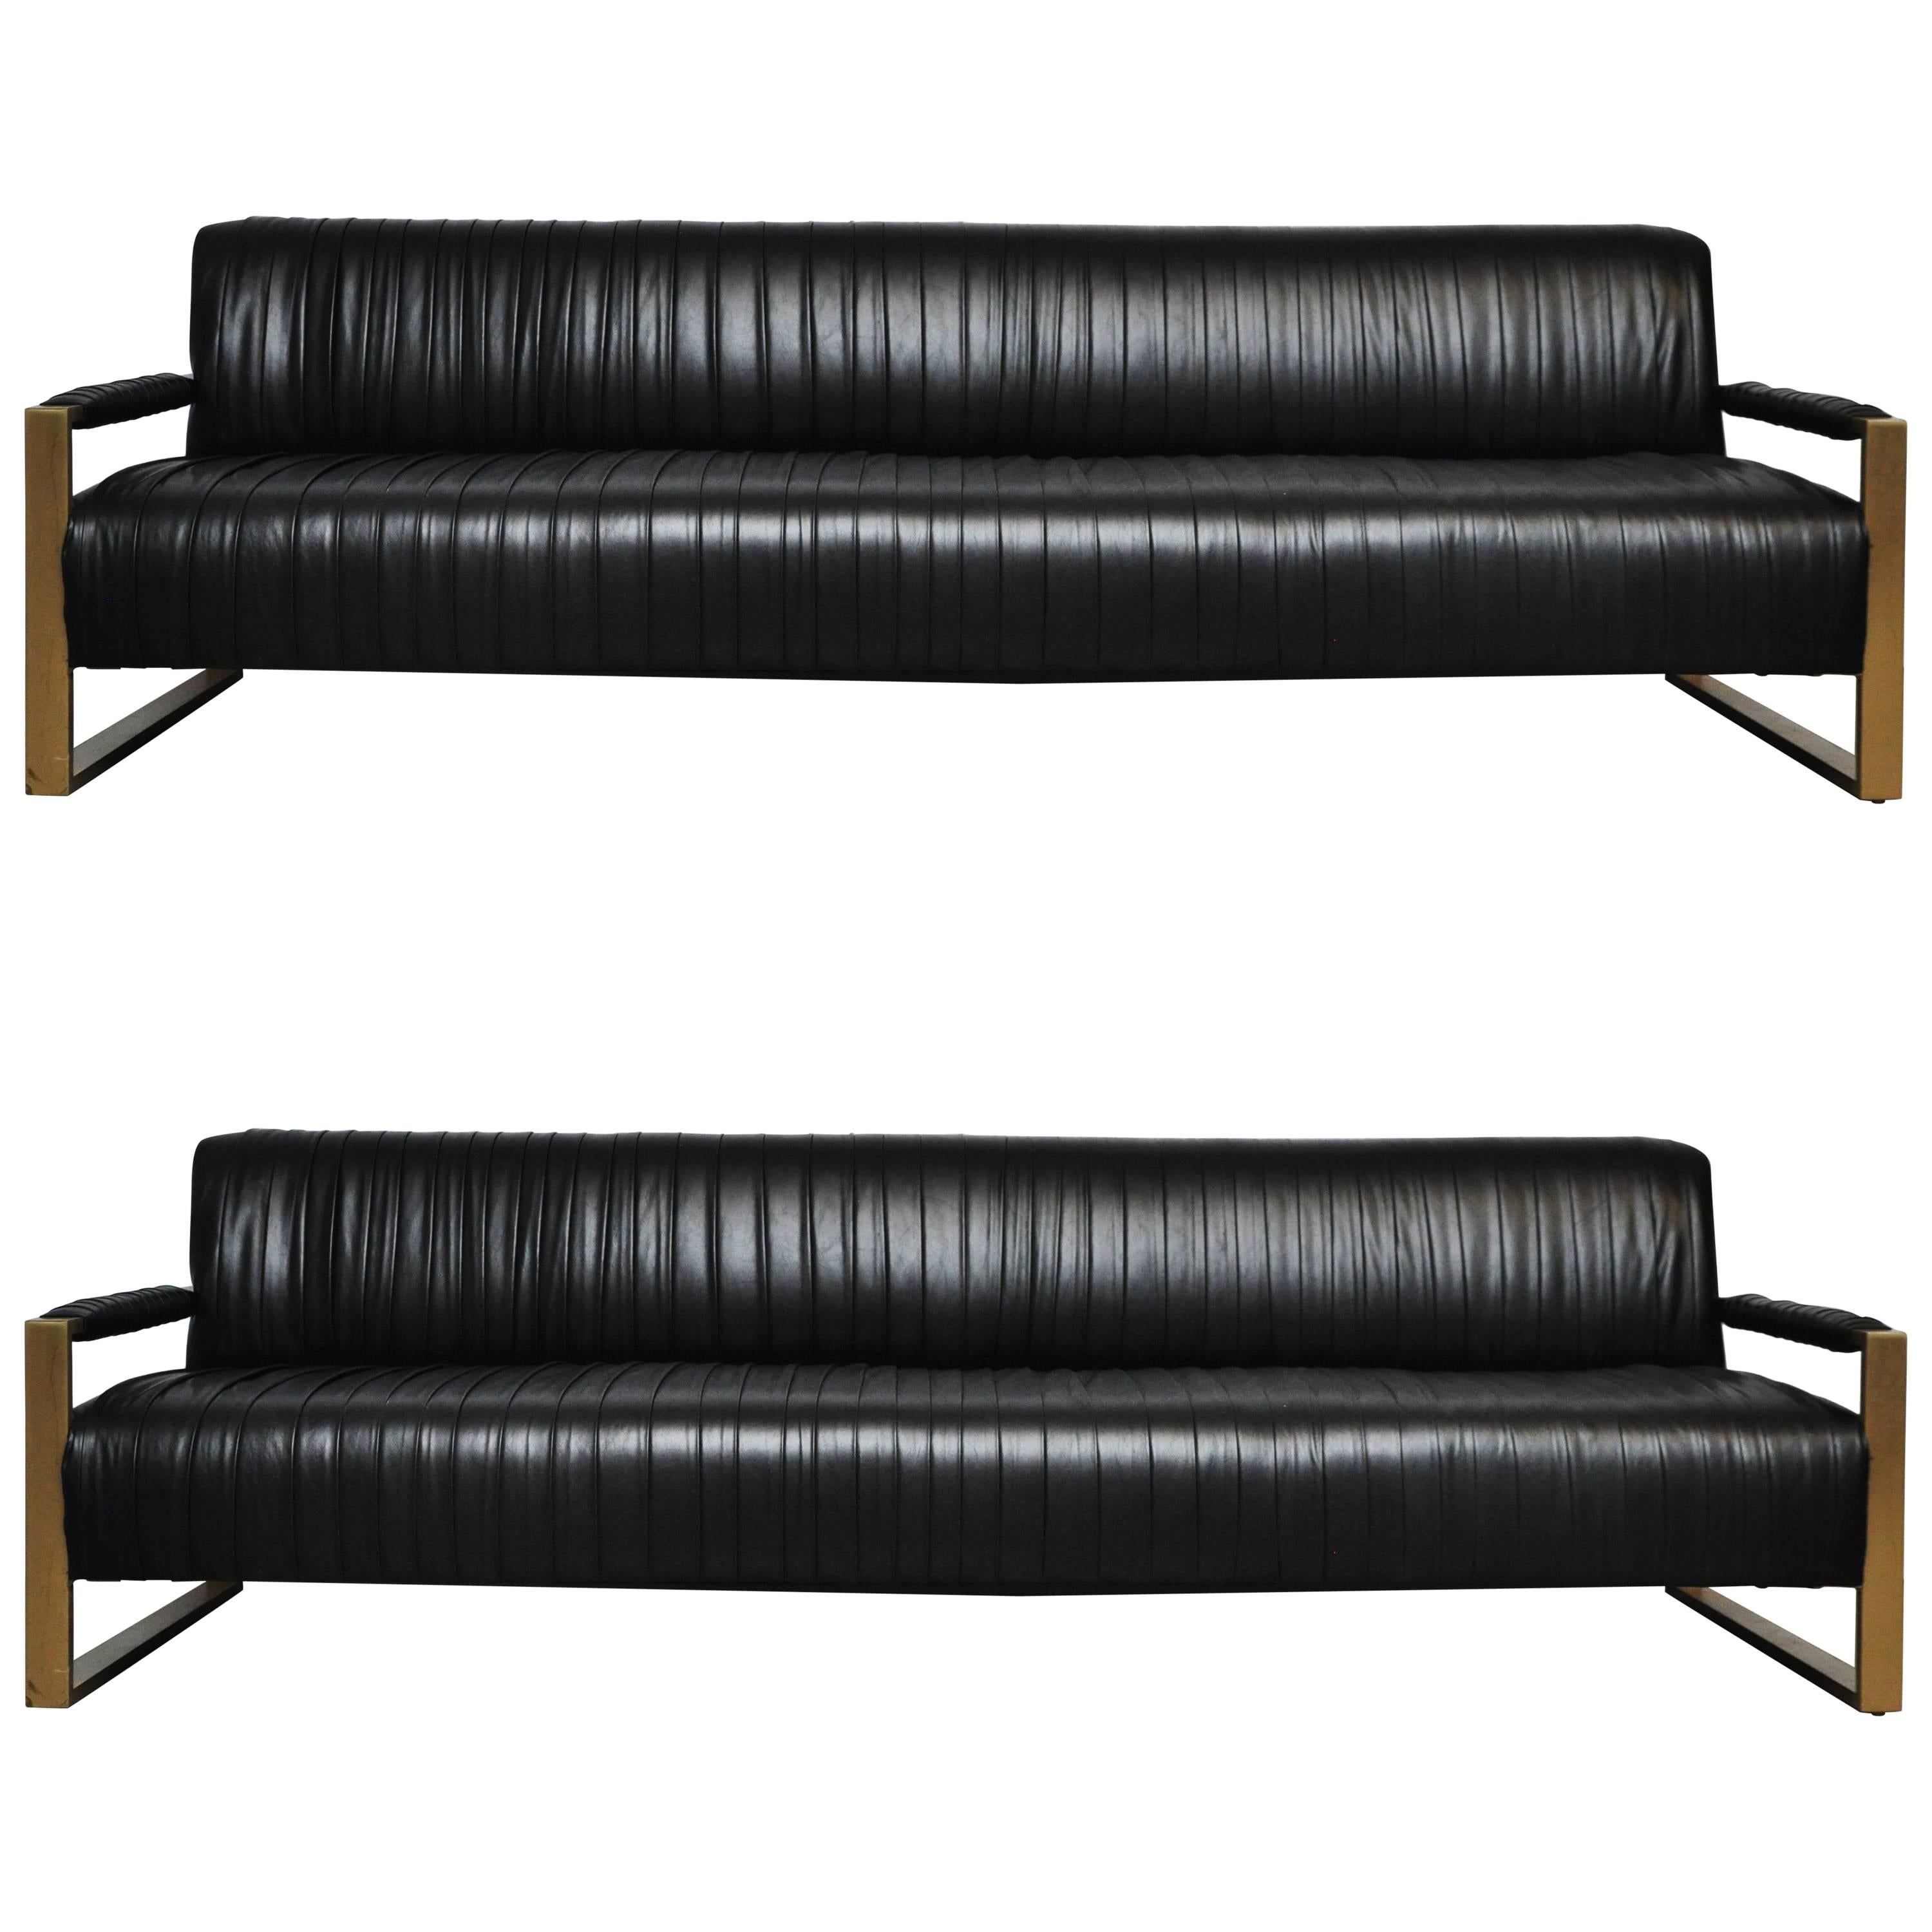 Modern Drama Pleated Leather Sofa with Brushed Brass Frames